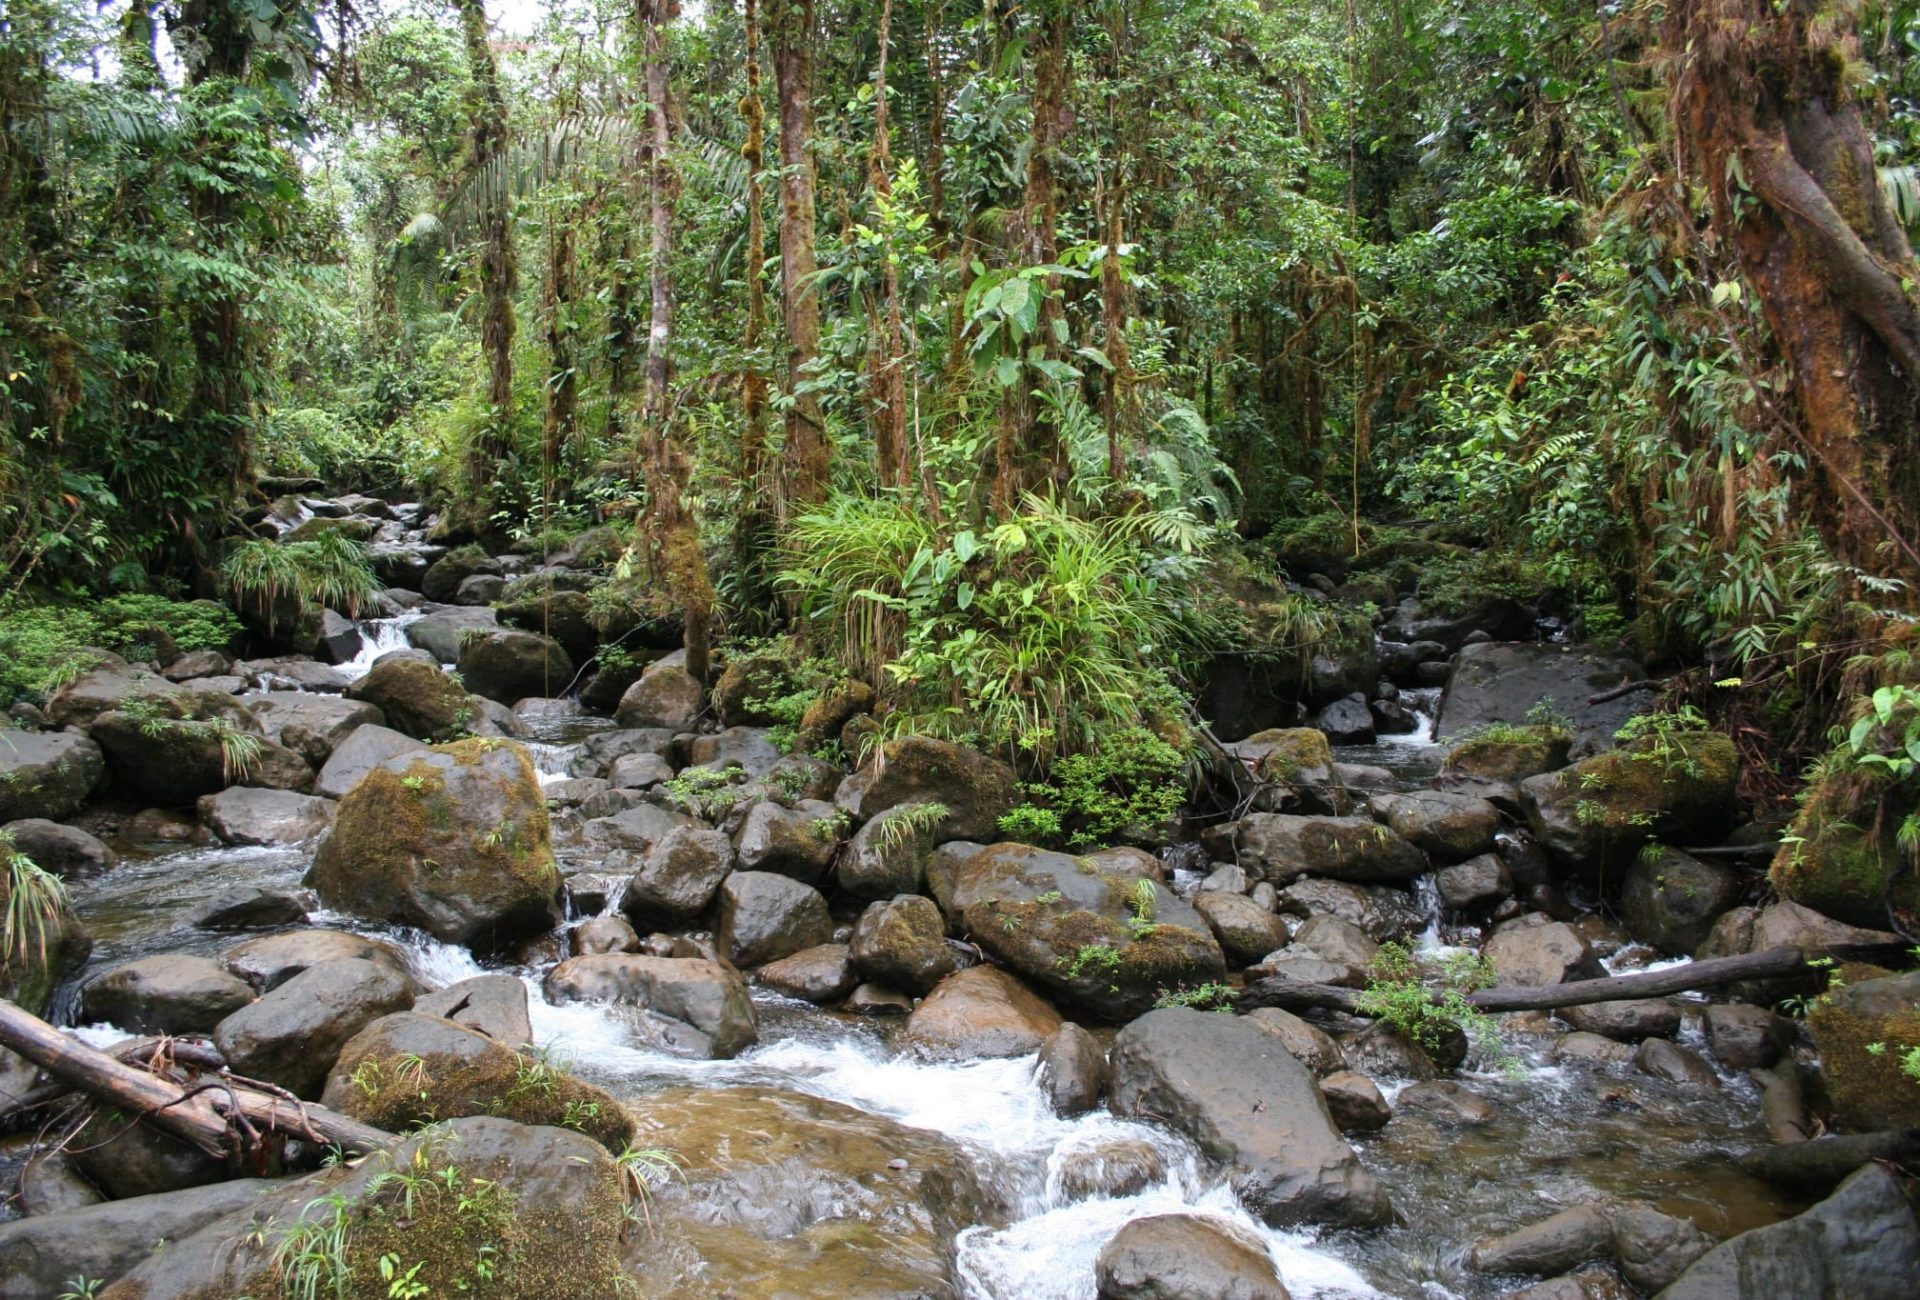 Rainforest in Colombia